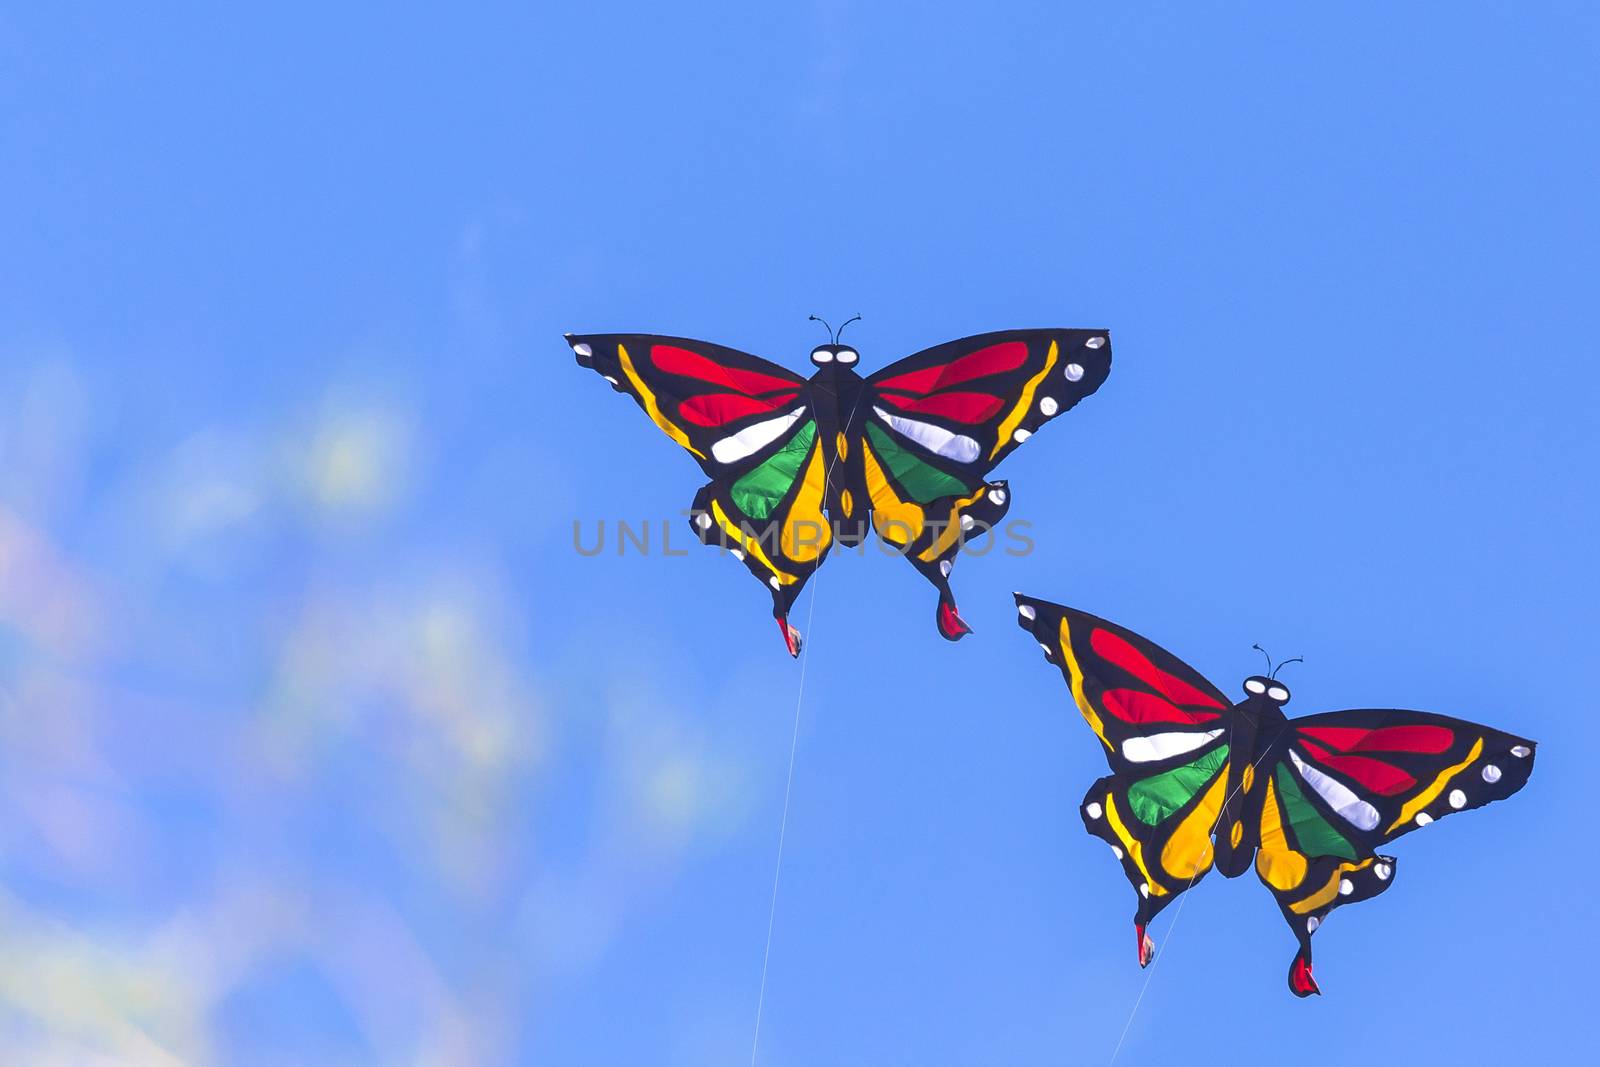 Colorful Kites Flying in Blue Sky by truphoto